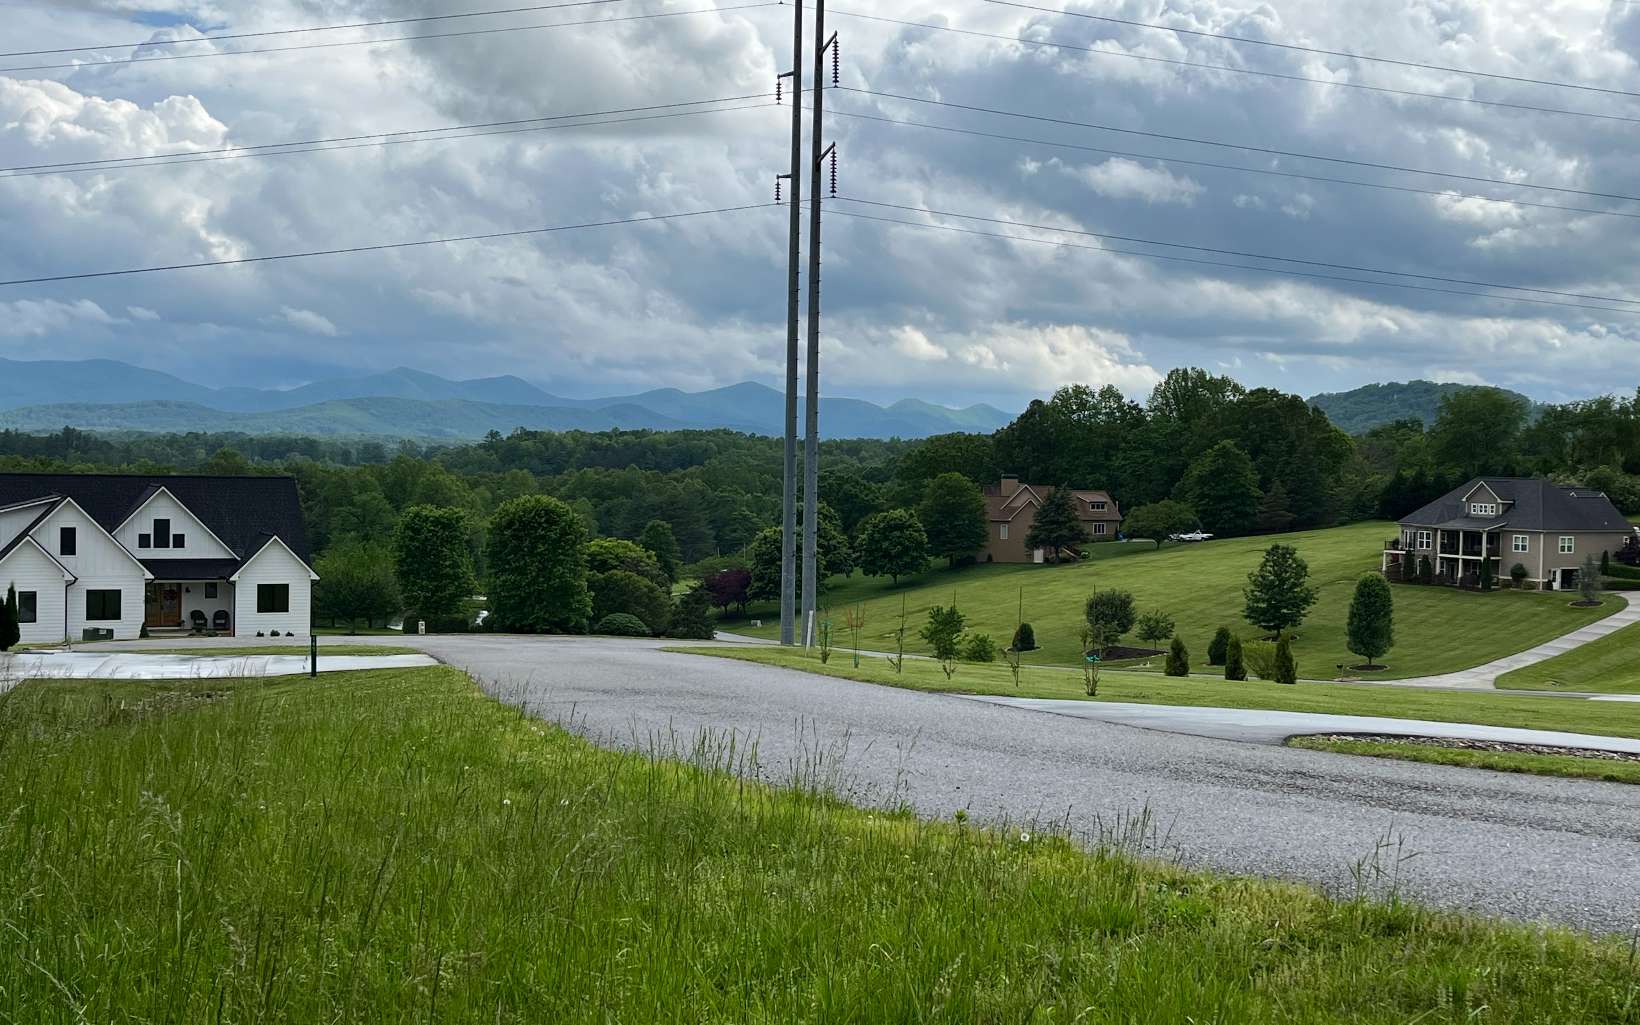 Amazing 1.03 acres mountain view lot in! Located within minutes of downtown Blairsville and the marina on Lake Nottley. The Arbor offers gated access, paved roads, a clubhouse, swimming pool, walking trails and so much more! It's time to draw up your plans for your new home in the mountains.